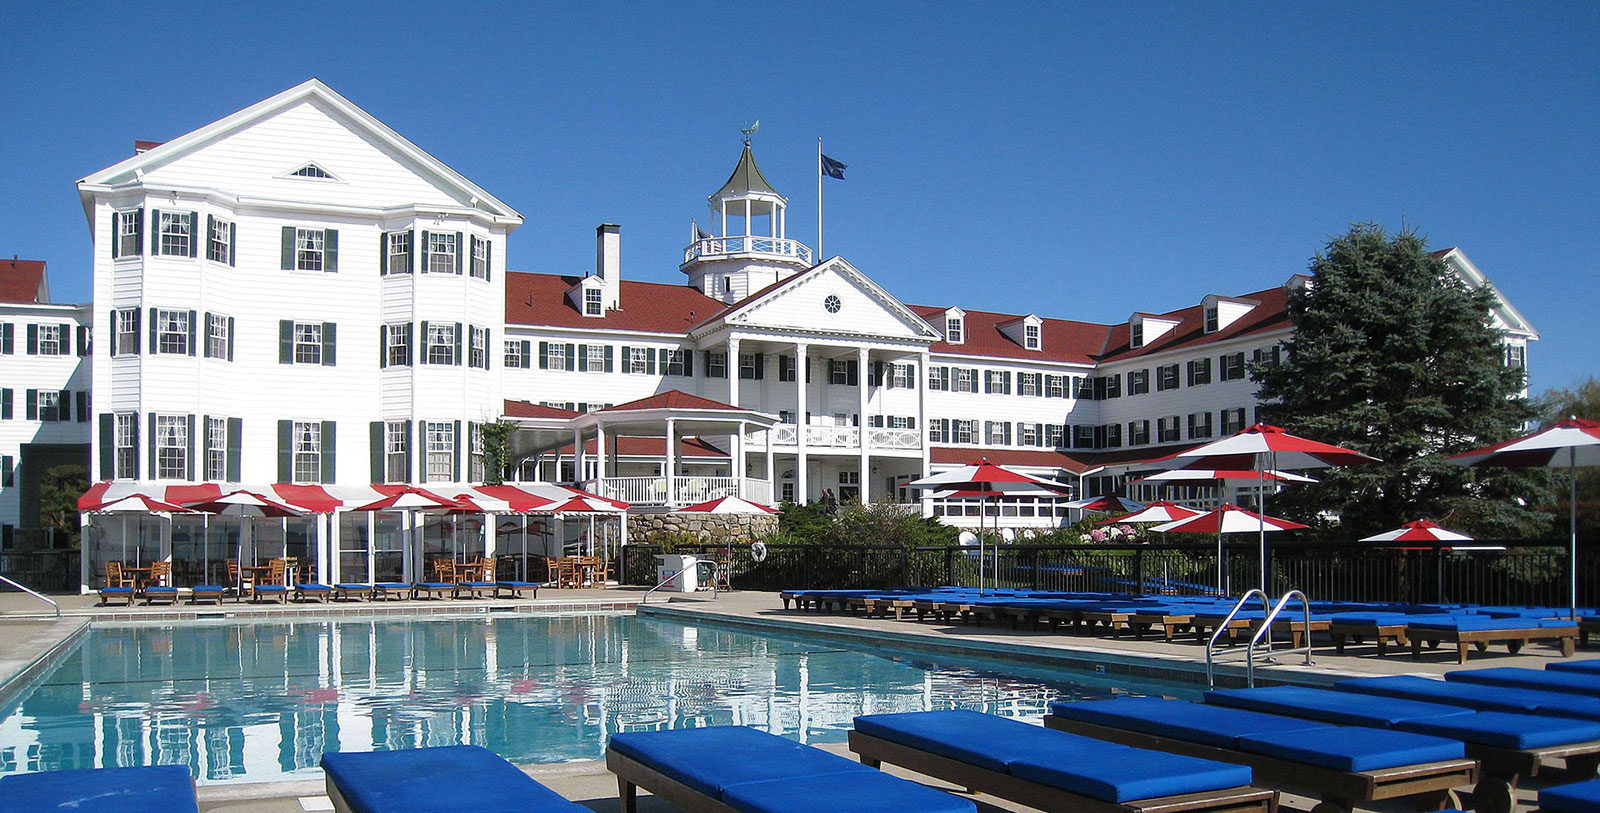 Image of Pool The Colony Hotel, 1914, Member of Historic Hotels of America, in Kennebunkport, Maine, Hot Deals